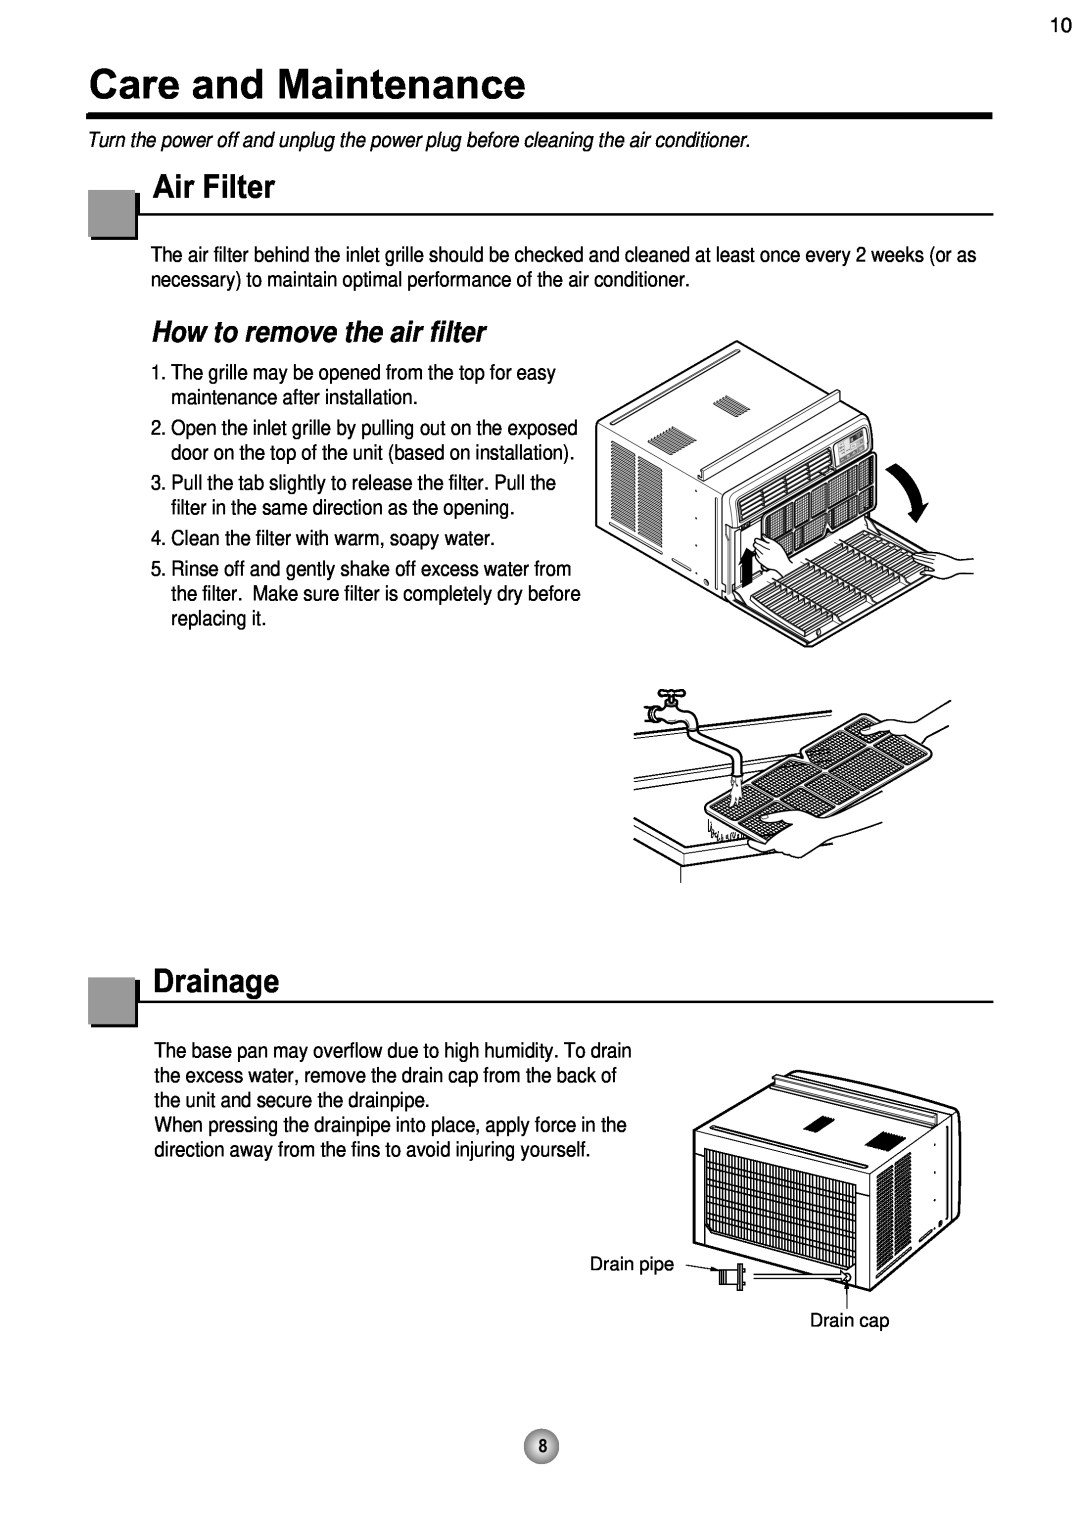 Friedrich CP08 operation manual Care and Maintenance, Air Filter, Drainage, How to remove the air filter 